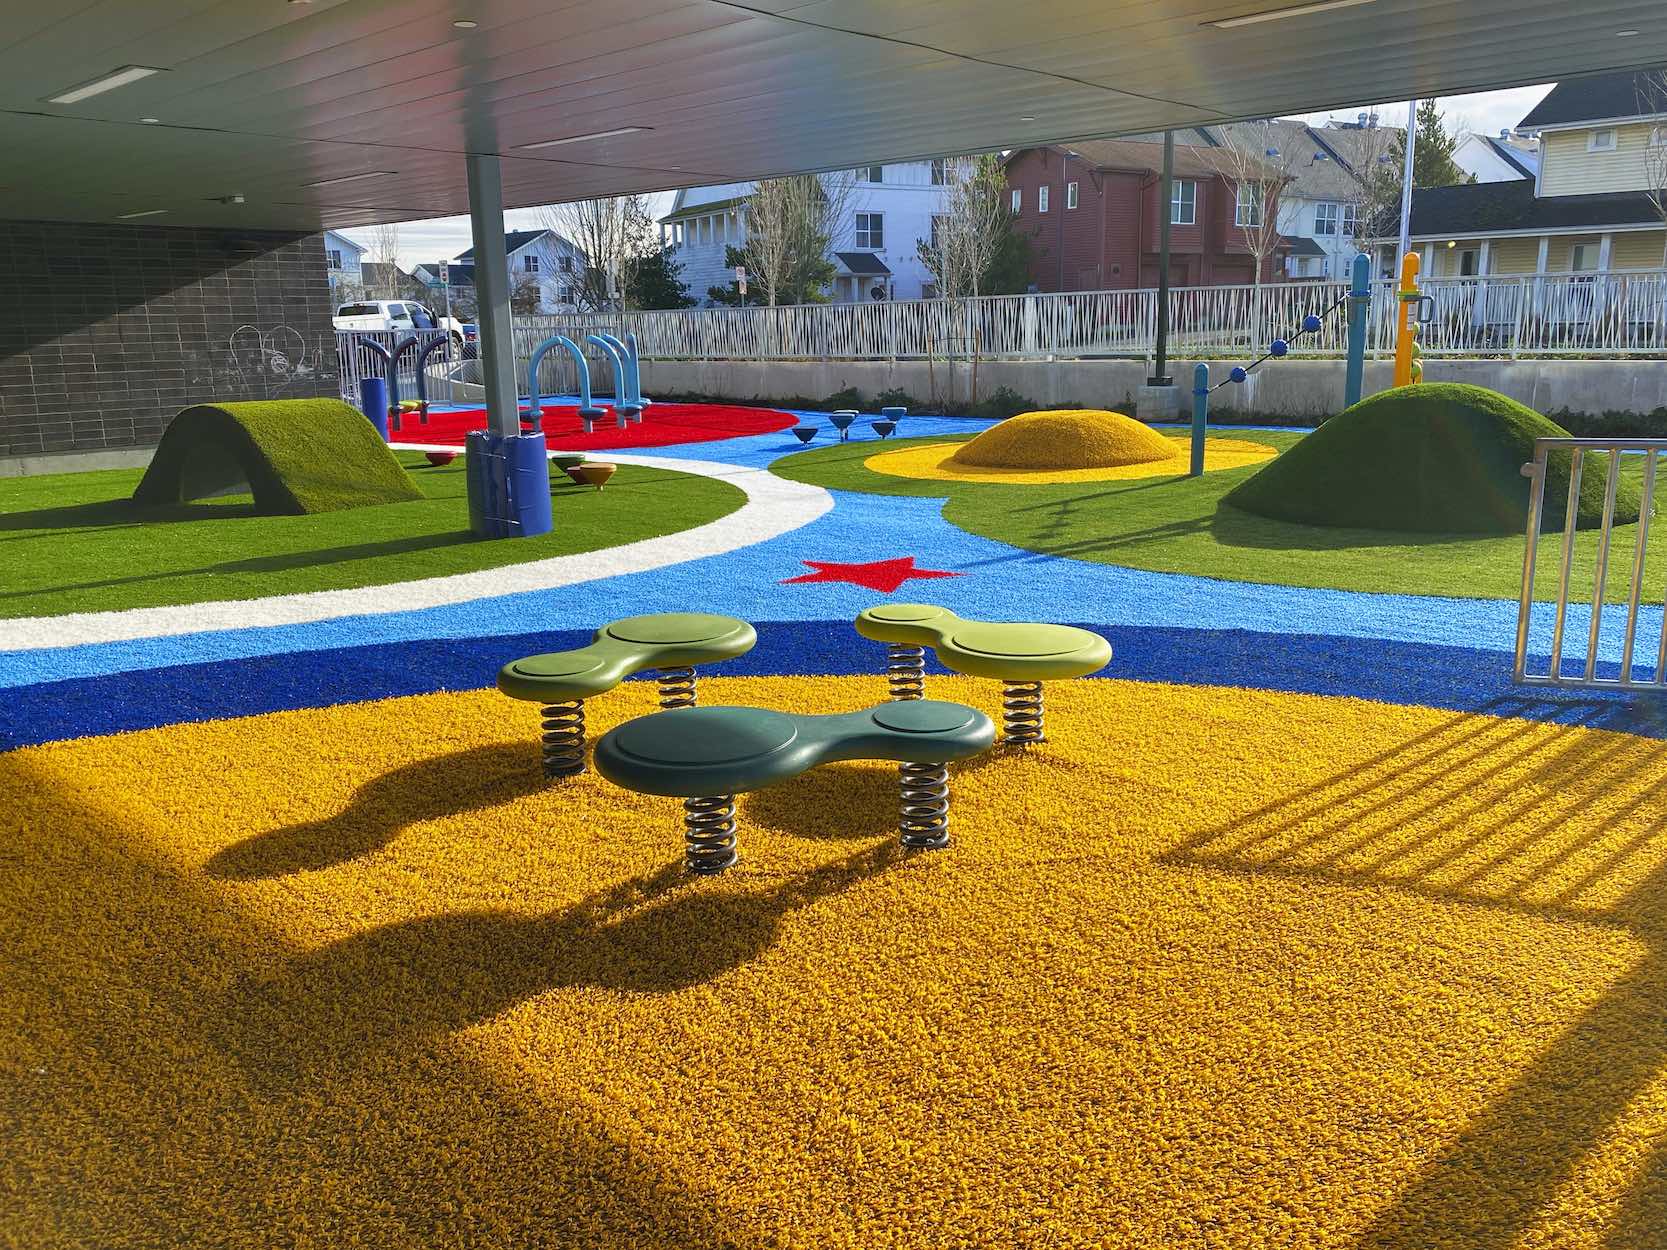 A colorful playground with artificial grass, vibrant safety surfacing, a four-seat spring teeter-totter, and play structures including slides and climbing features.